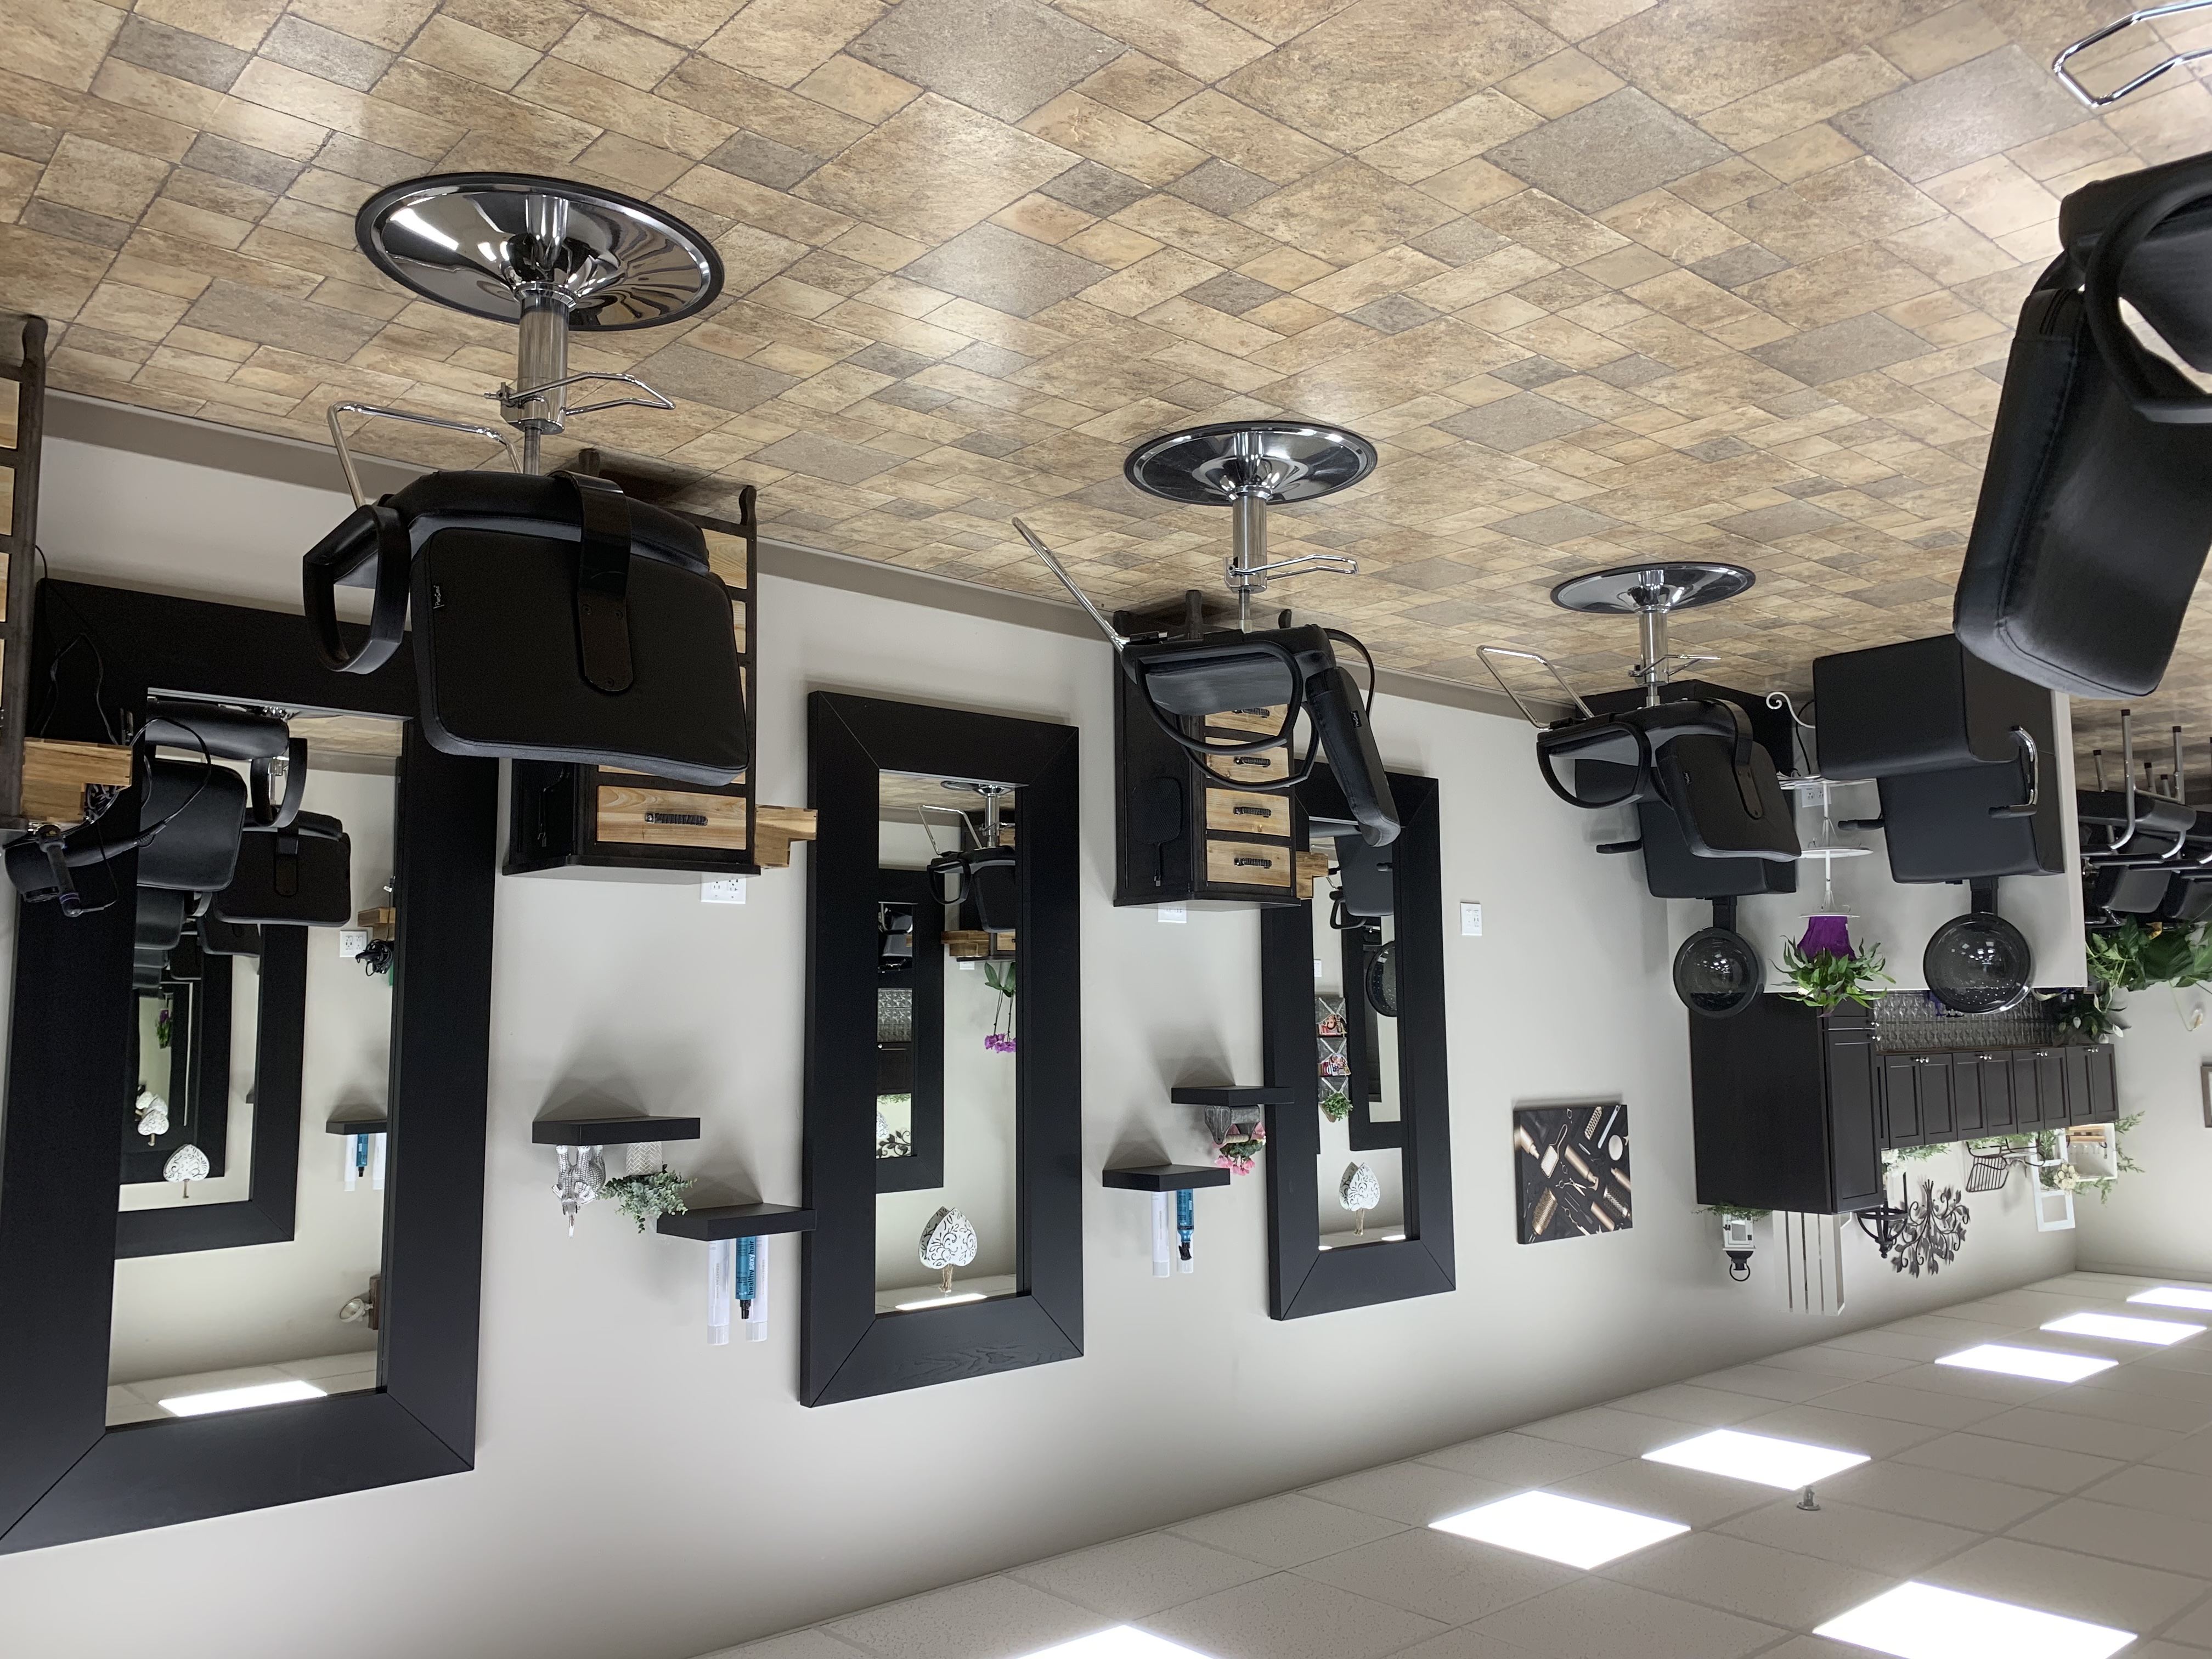 Multiple hair salon stations with black chairs and mirrors, tile floor, and ample lighting